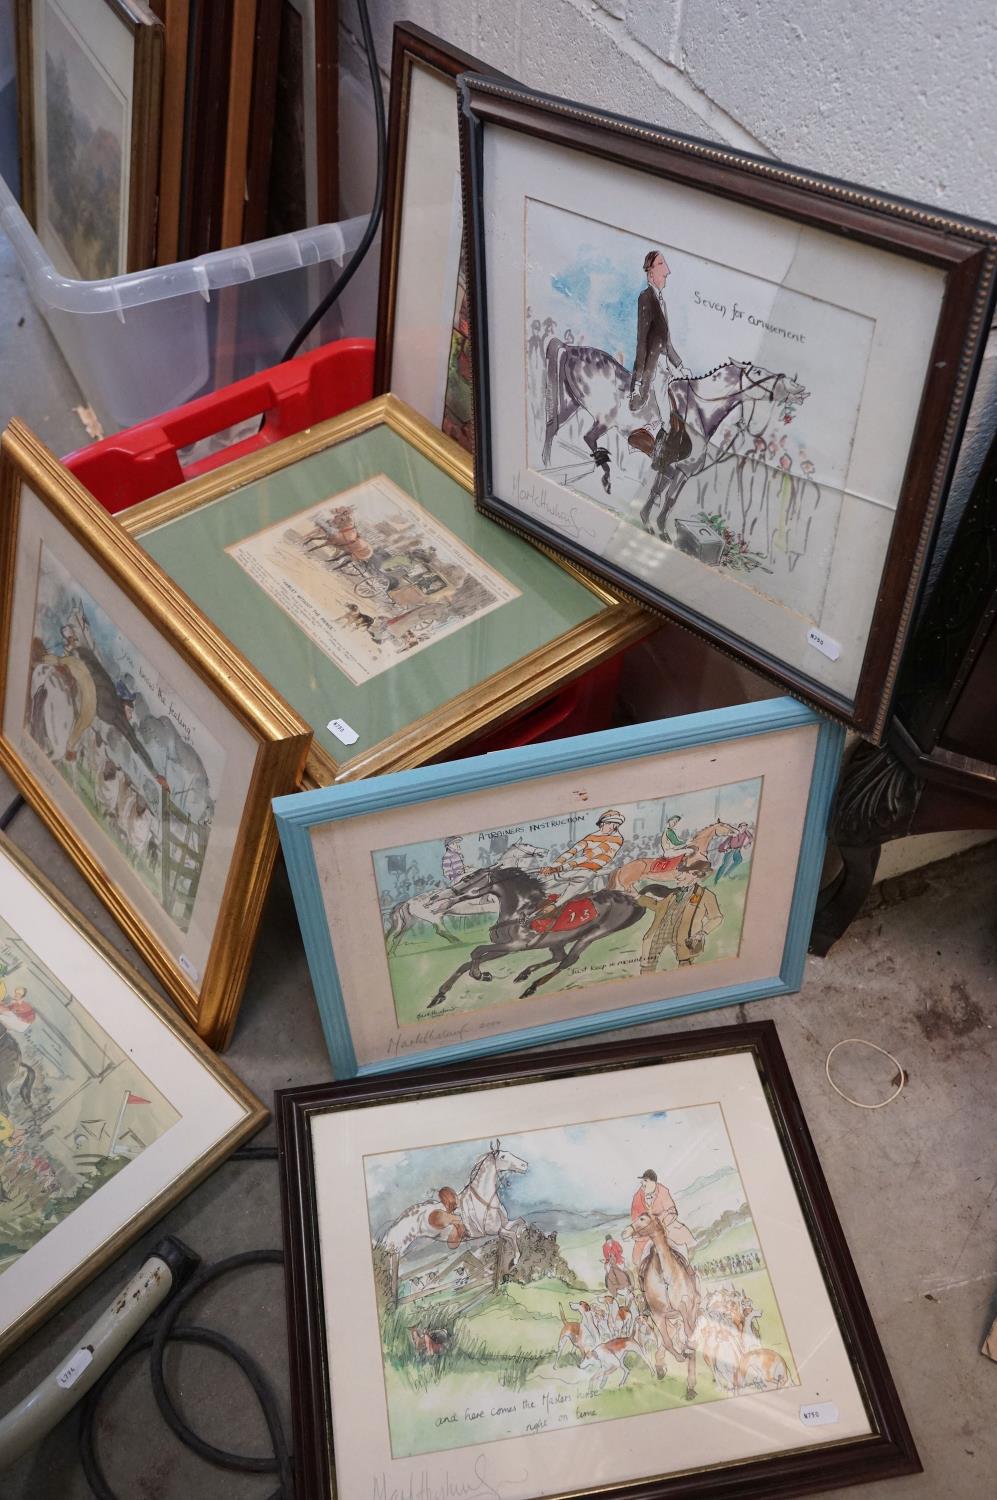 Five Mark Huskisson humorous horse prints and two other prints.